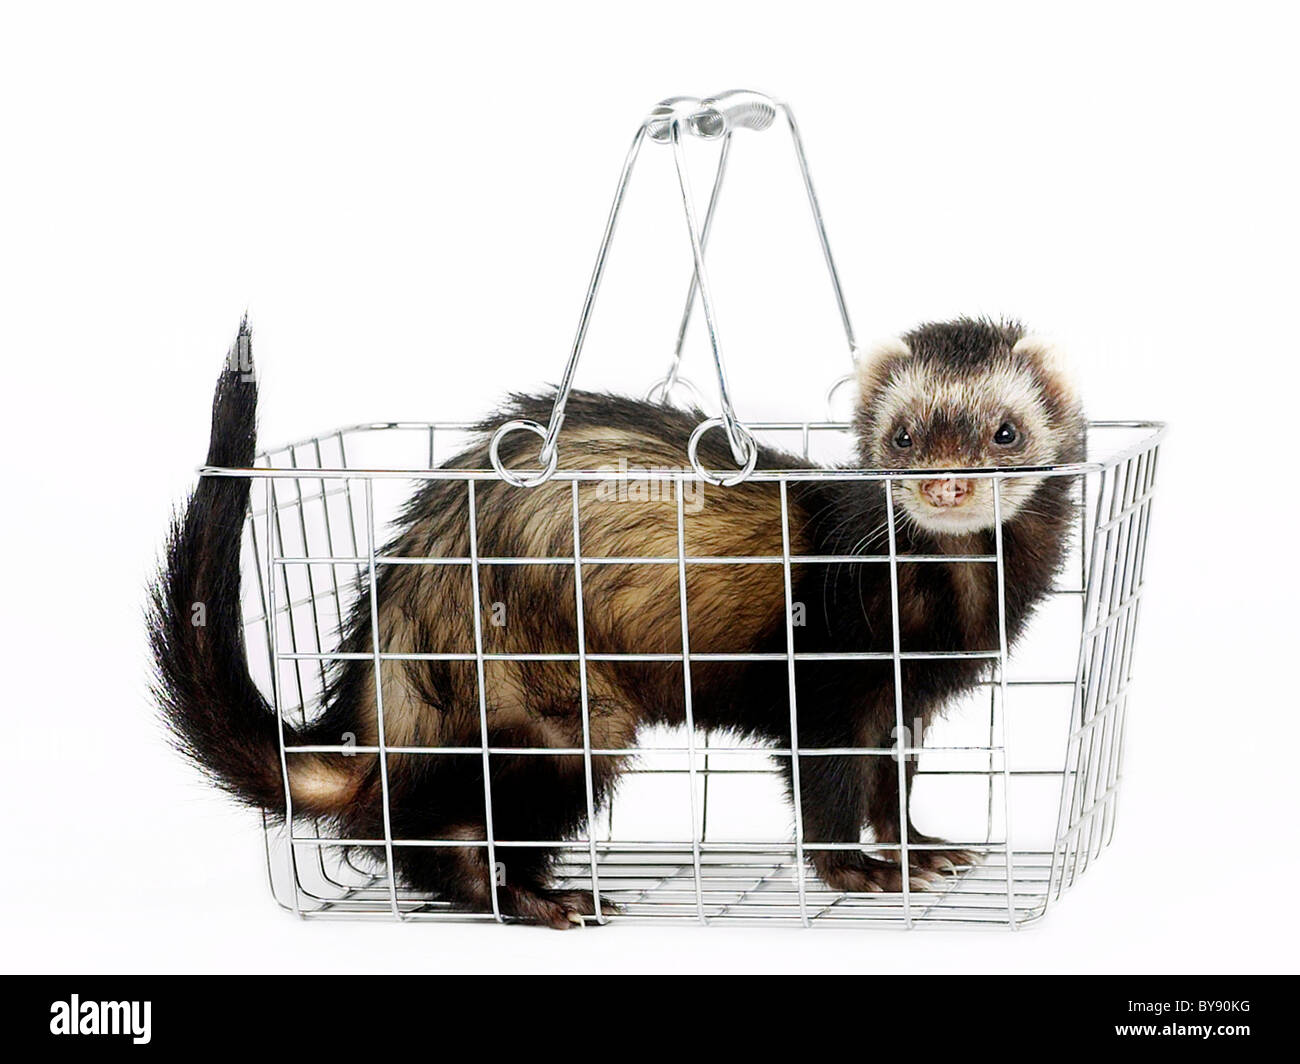 A ferret in a shopping basket. Stock Photo